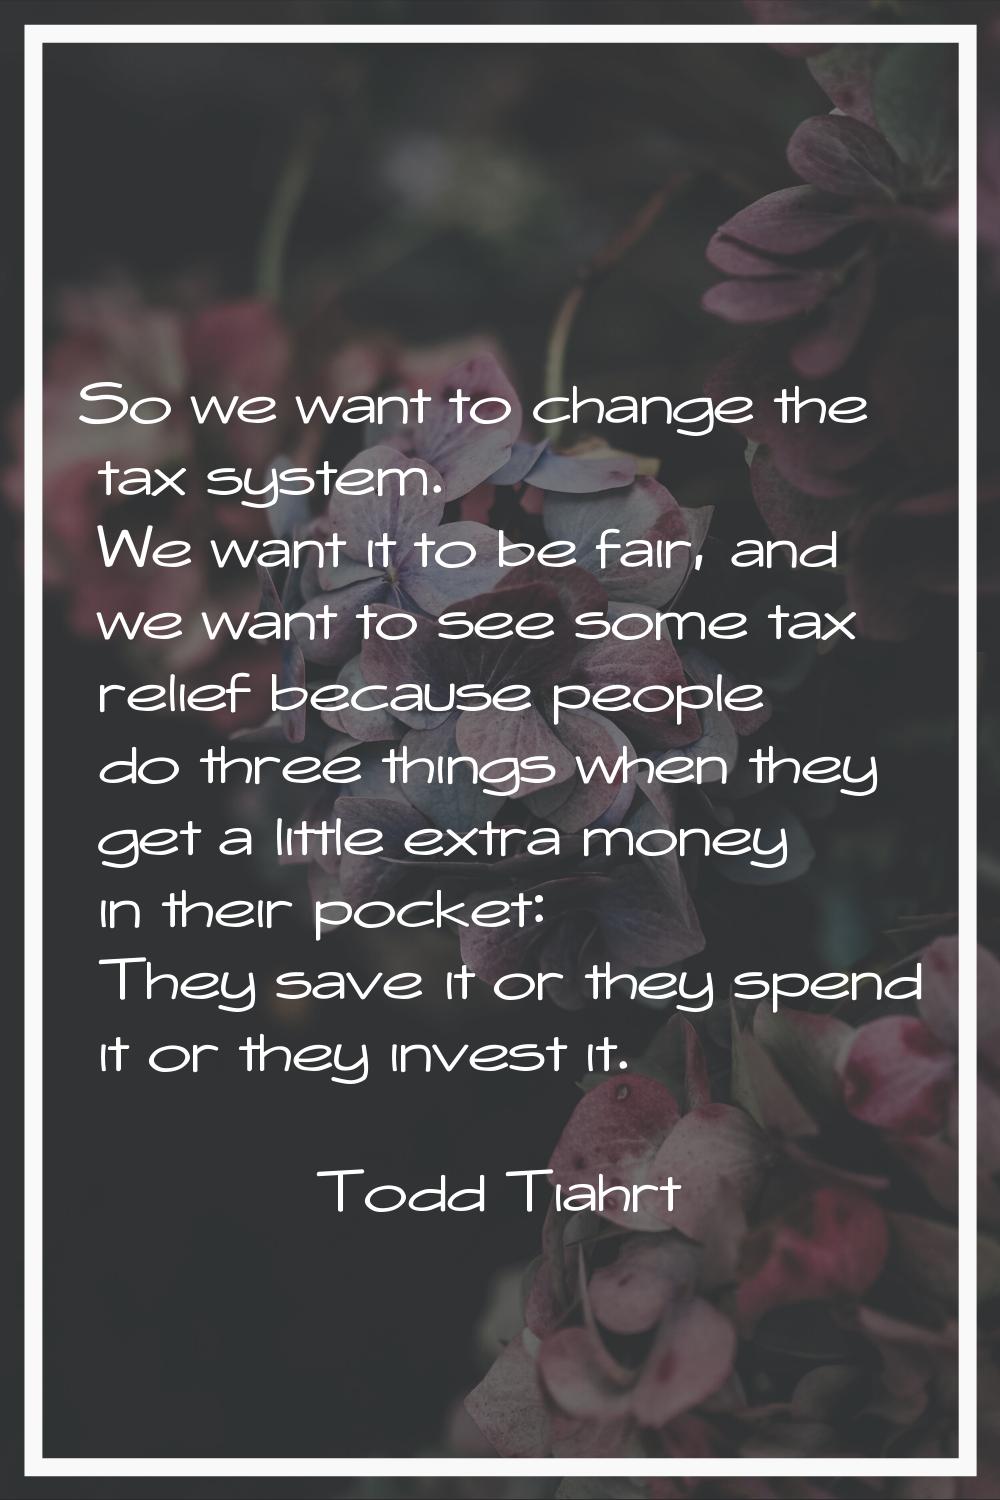 So we want to change the tax system. We want it to be fair, and we want to see some tax relief beca